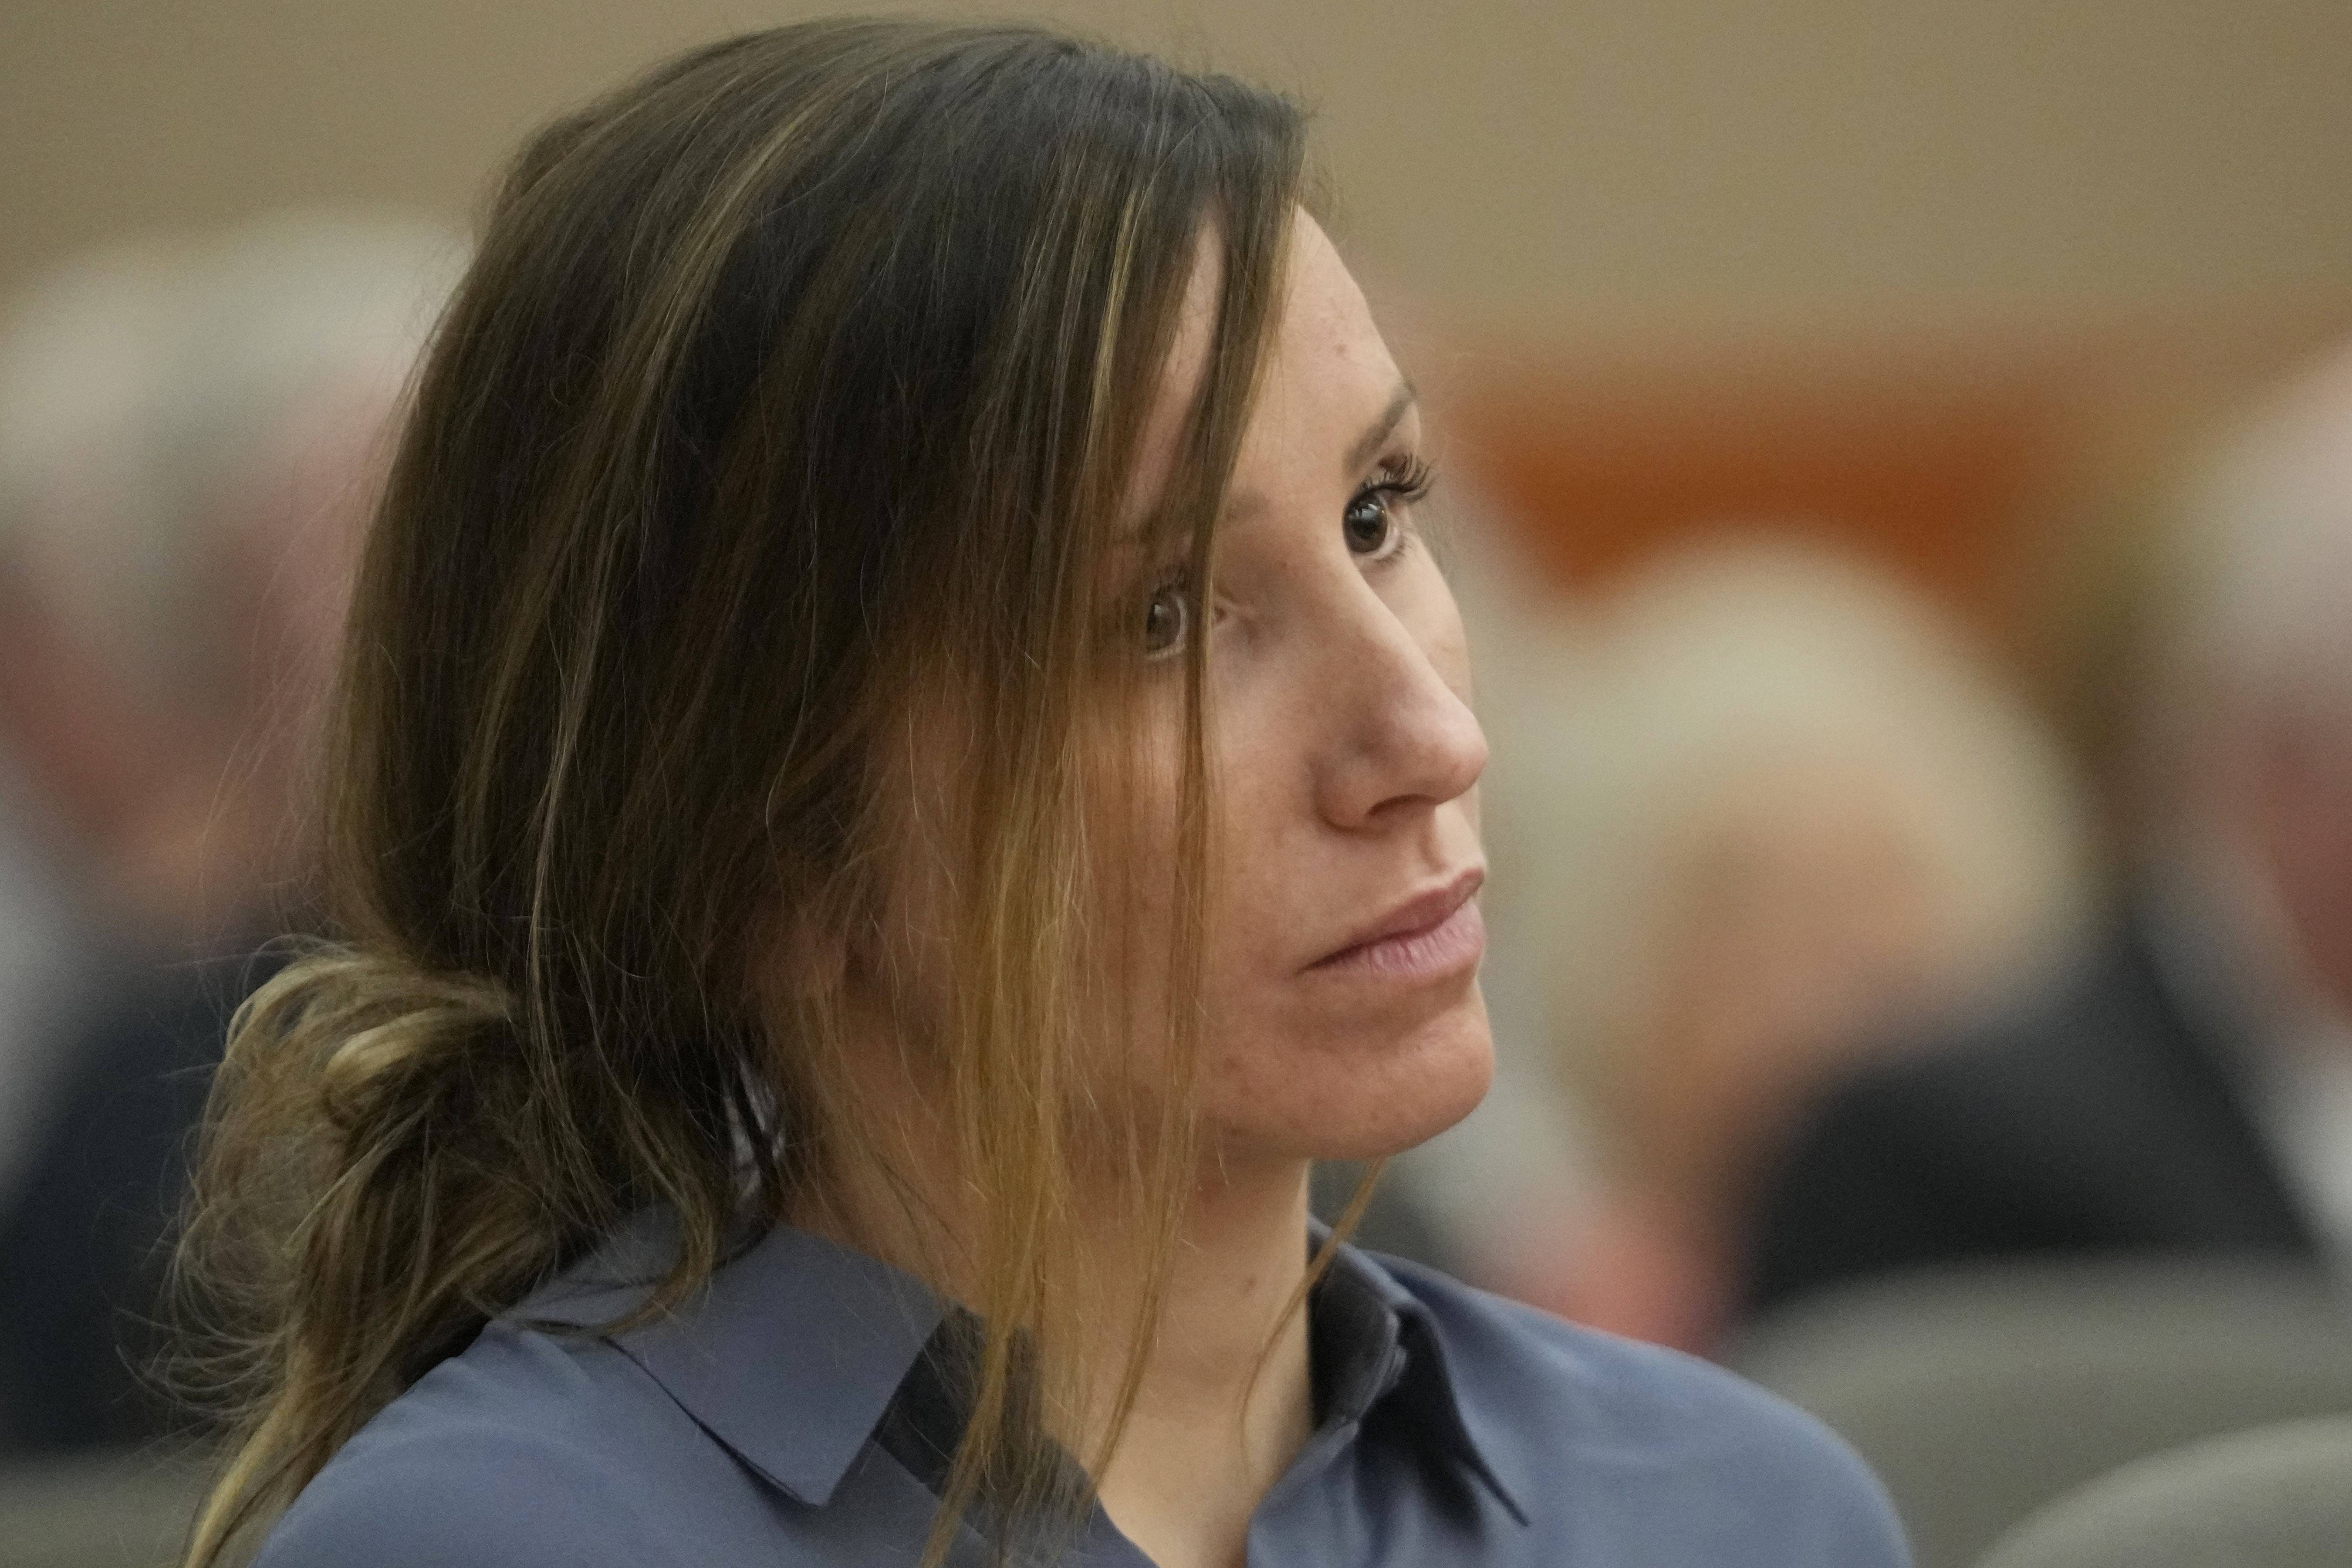 Kouri Richins case Prosecutors suspect witness tampering, citing letter Richins wrote mom in jail image